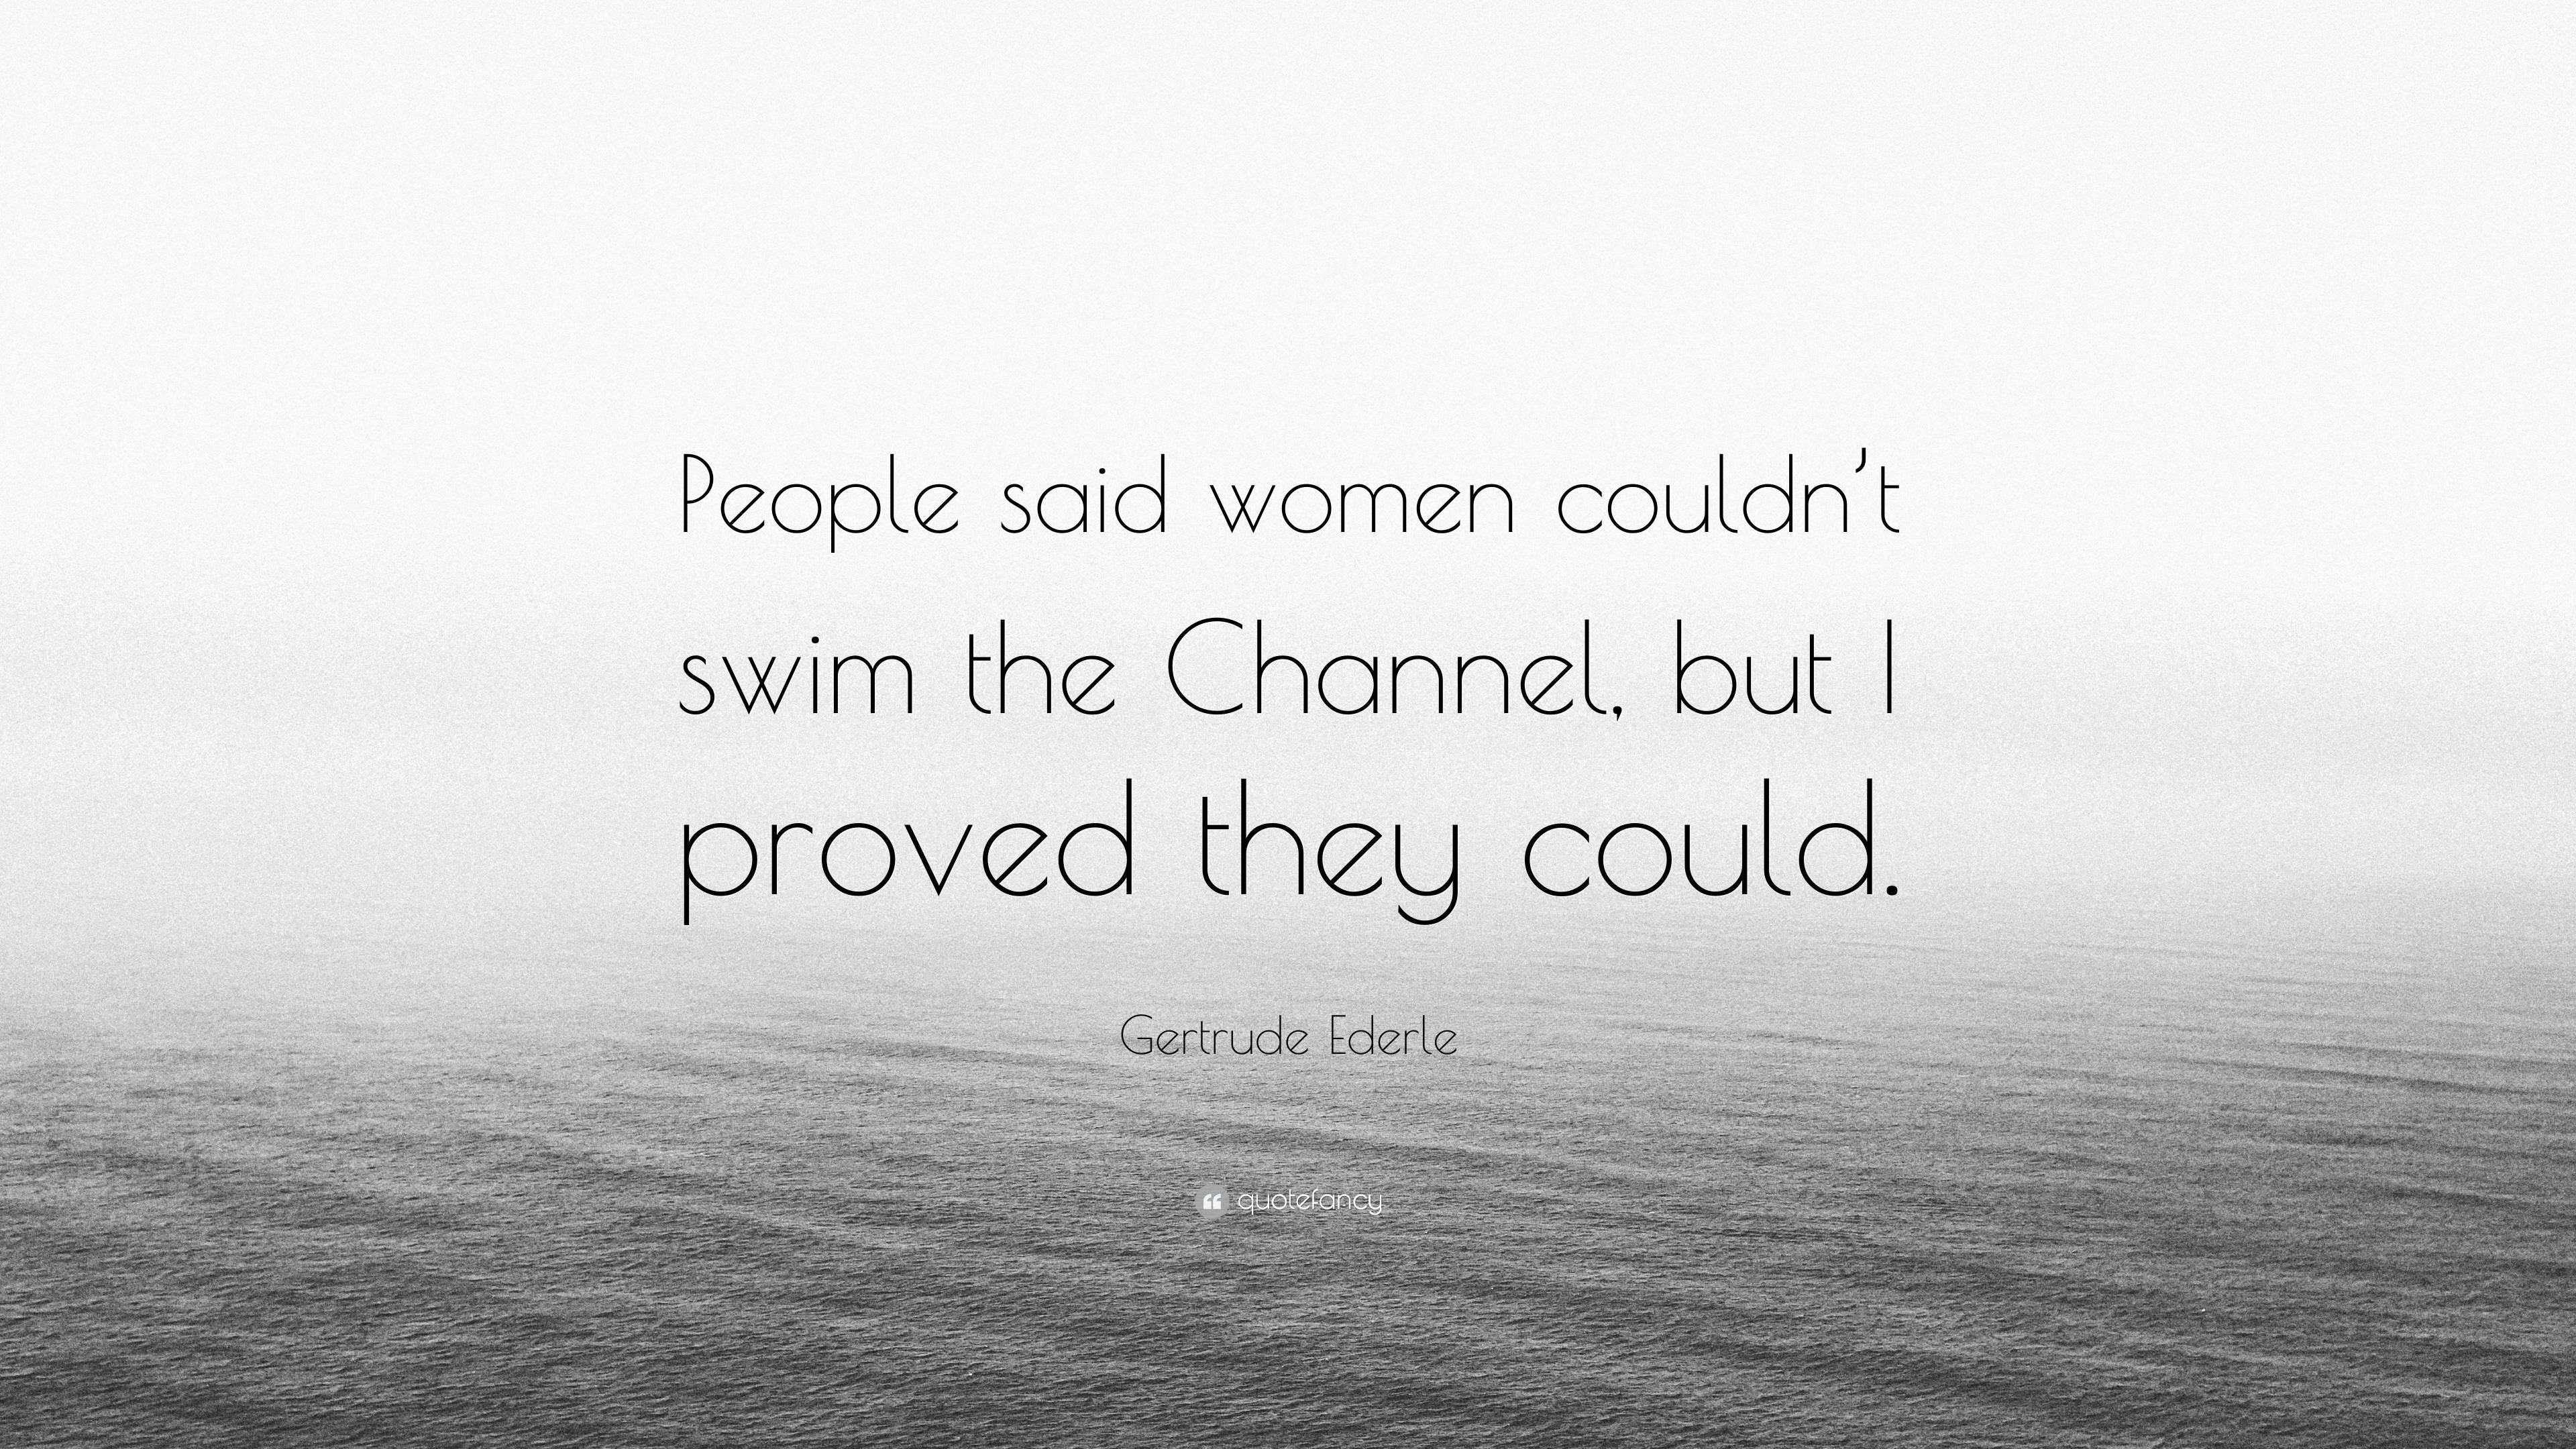 Gertrude Ederle Quote: “People said women couldn’t swim the Channel